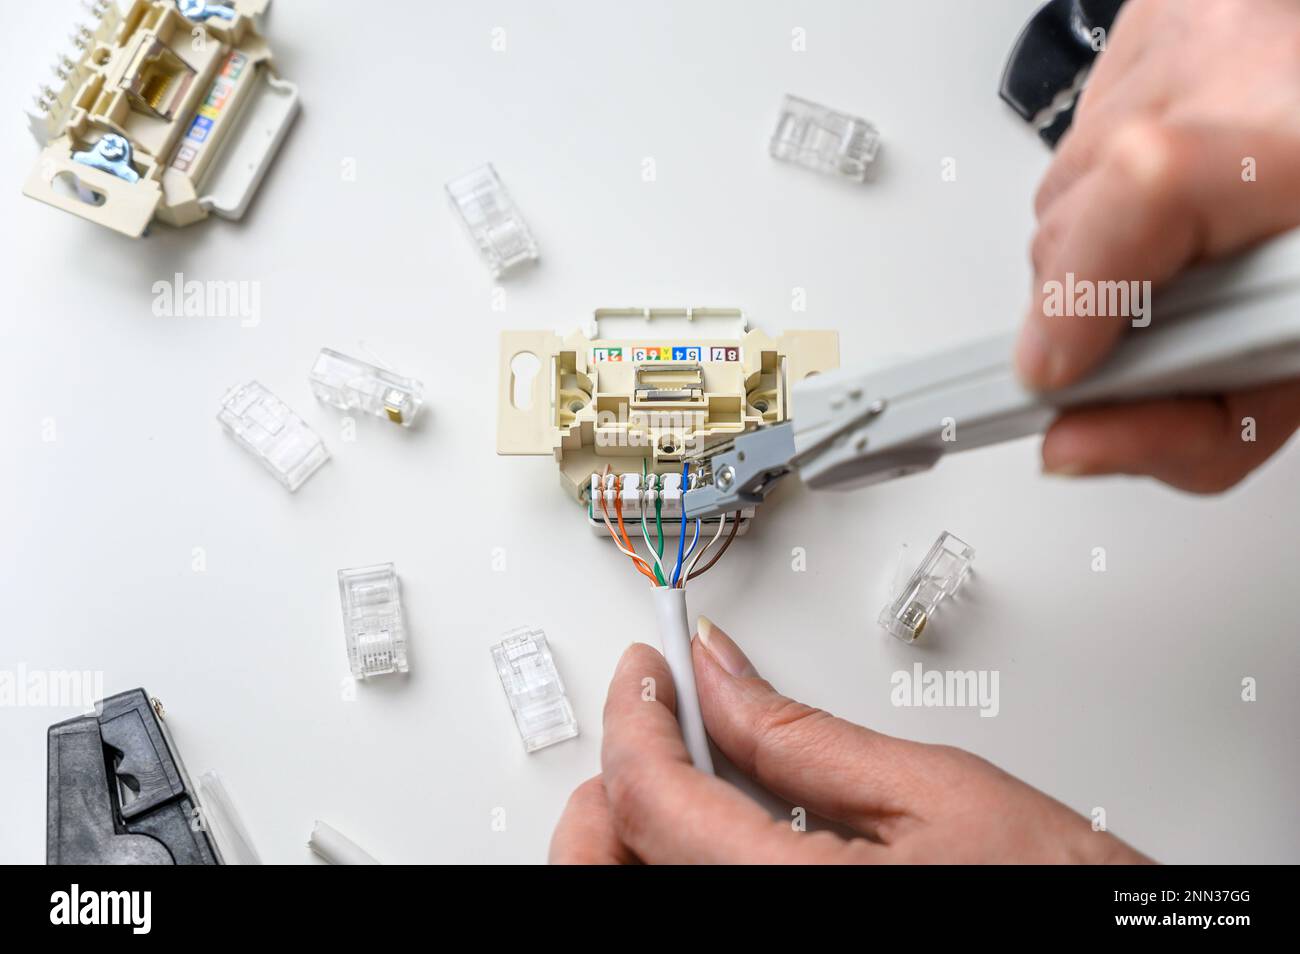 Mounting the RJ45 module, attaching the wire to the computer socket in the room. Stock Photo